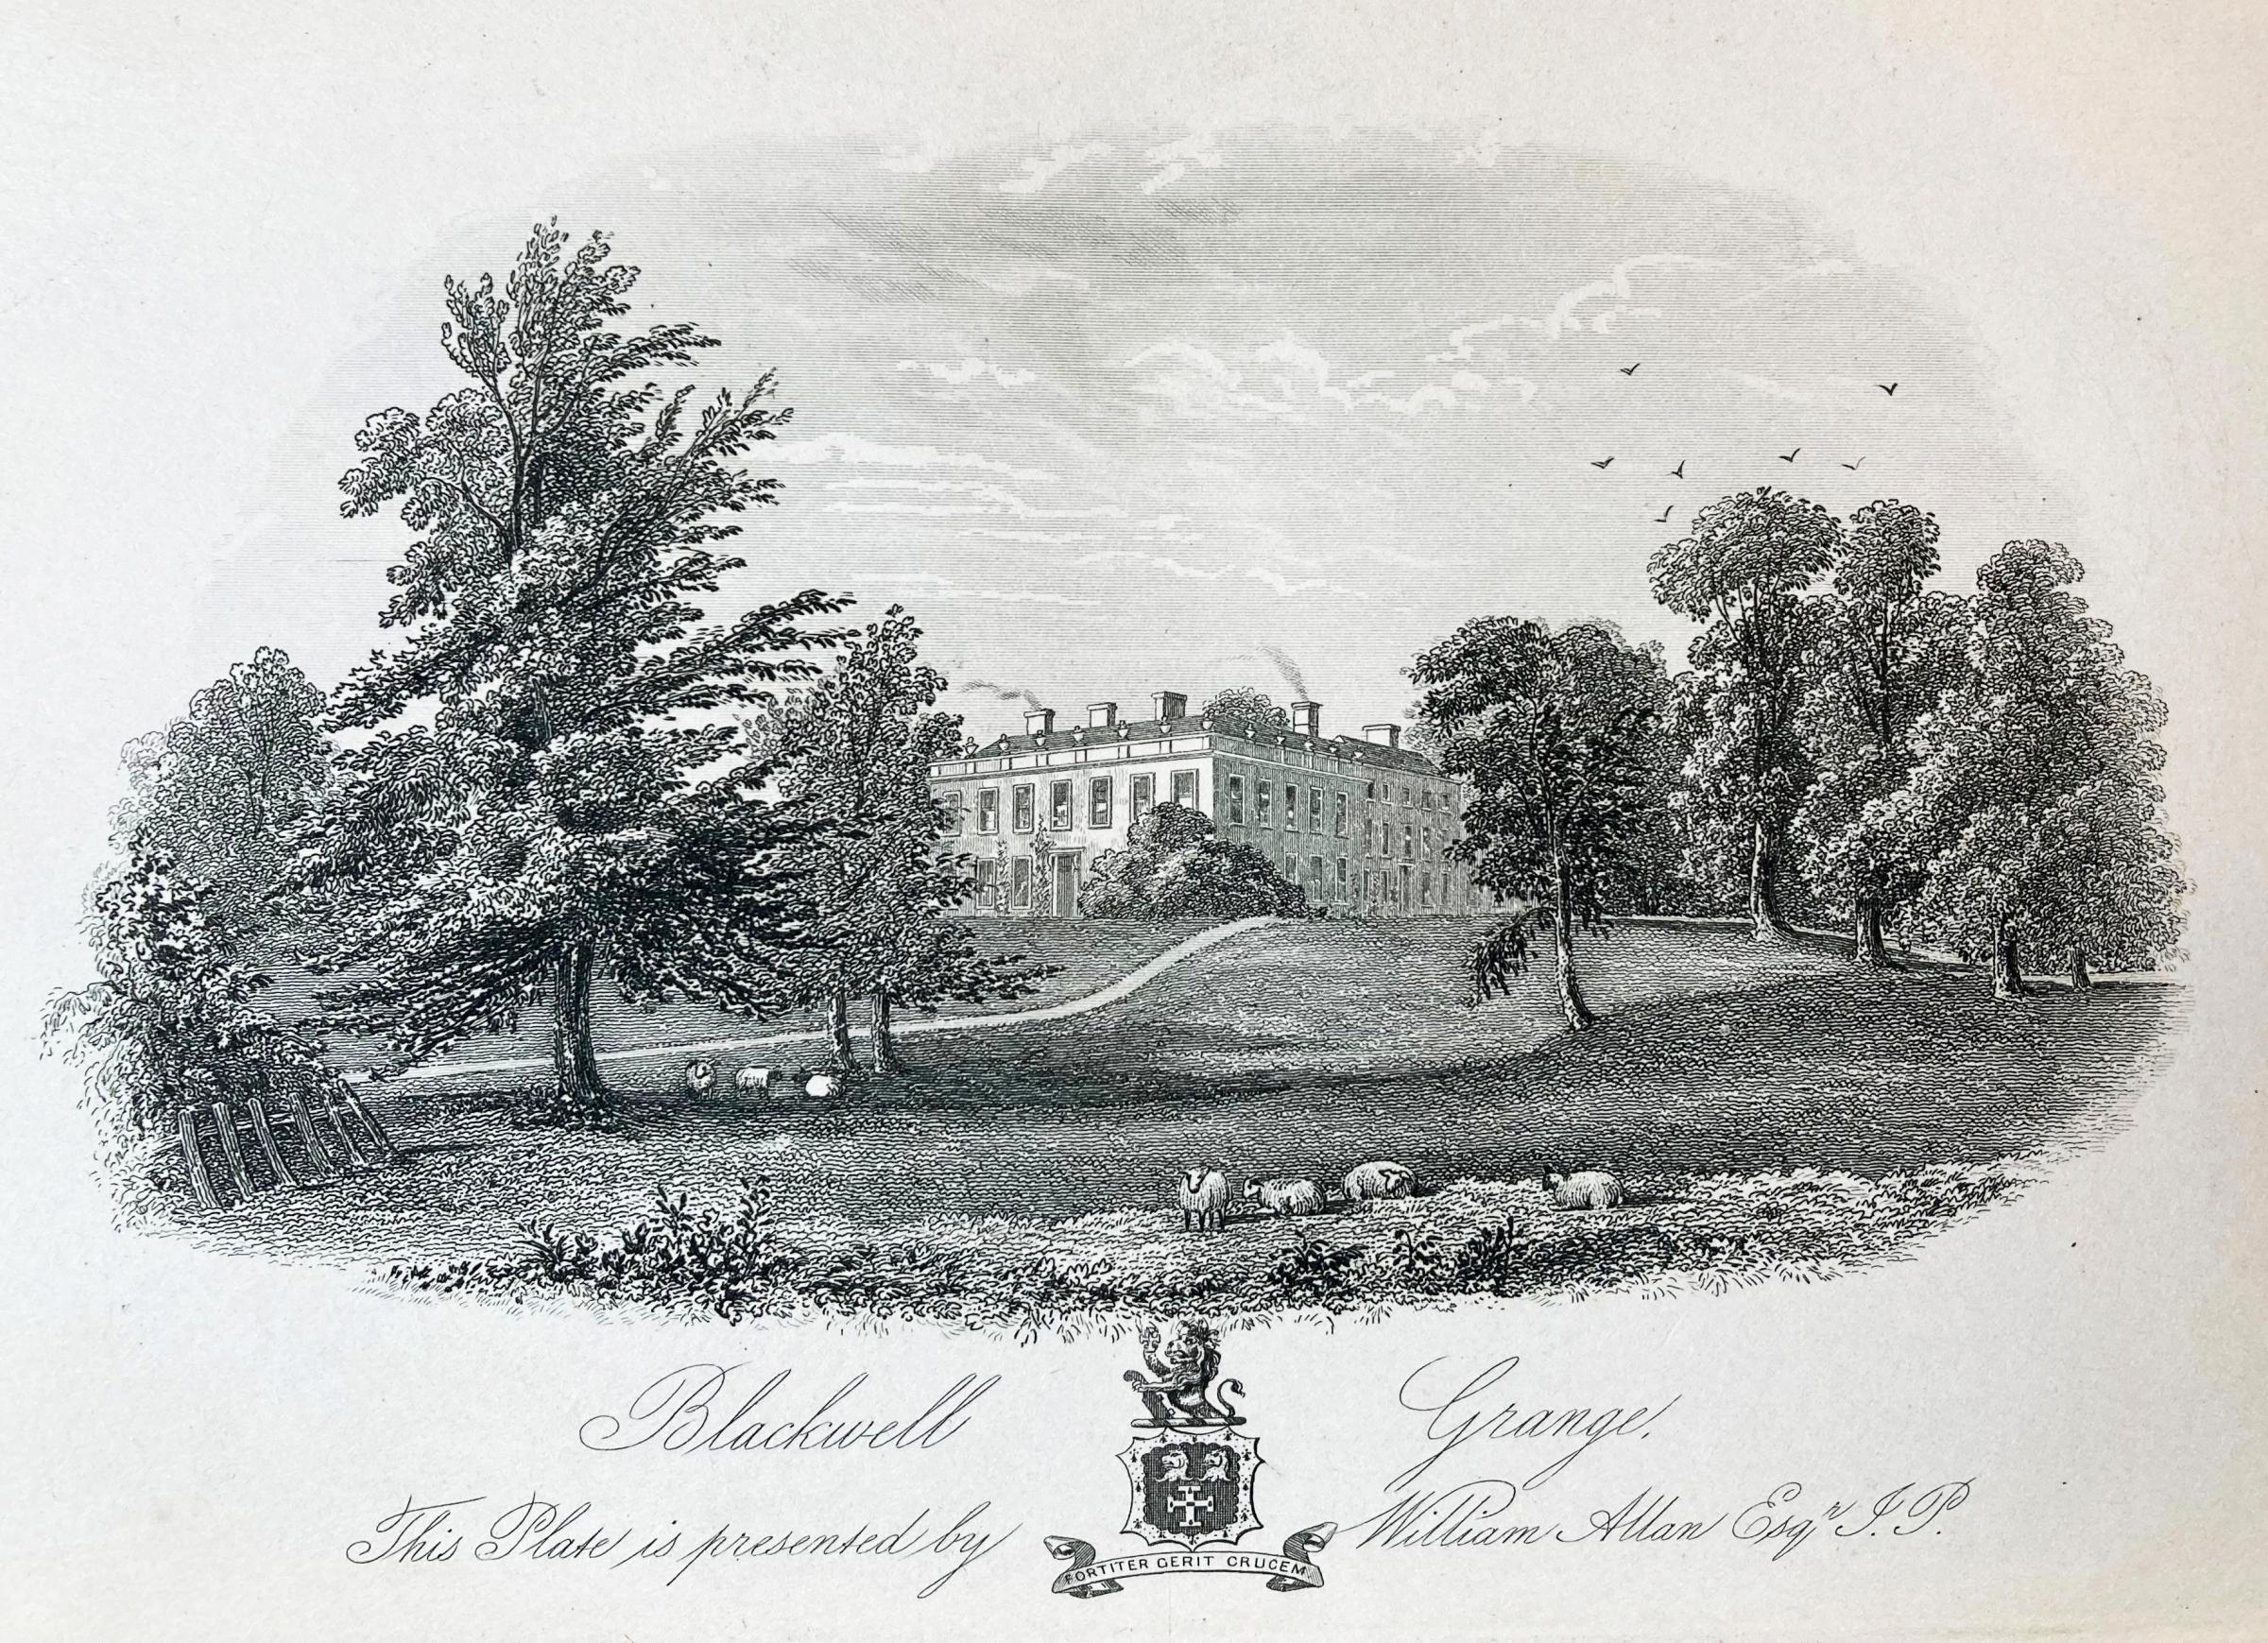 Blackwell Grange in the 1850s surrounded by trees